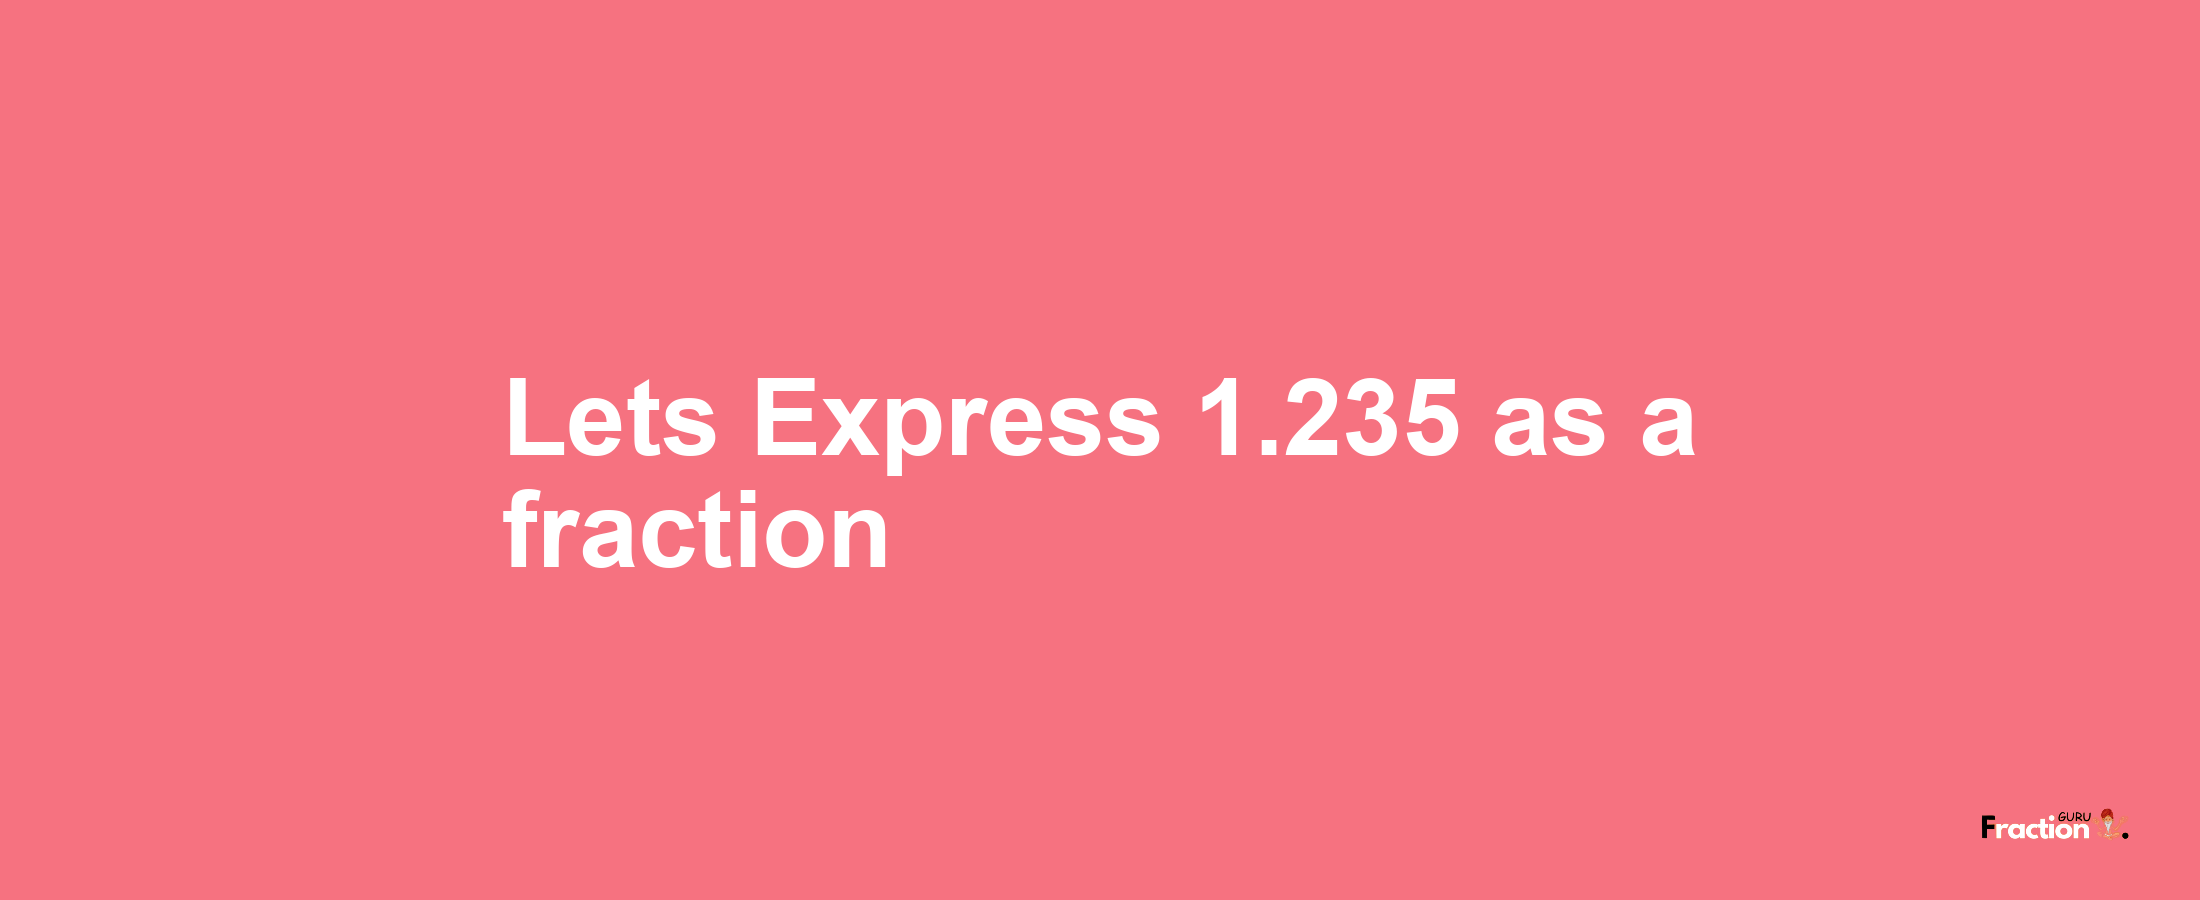 Lets Express 1.235 as afraction